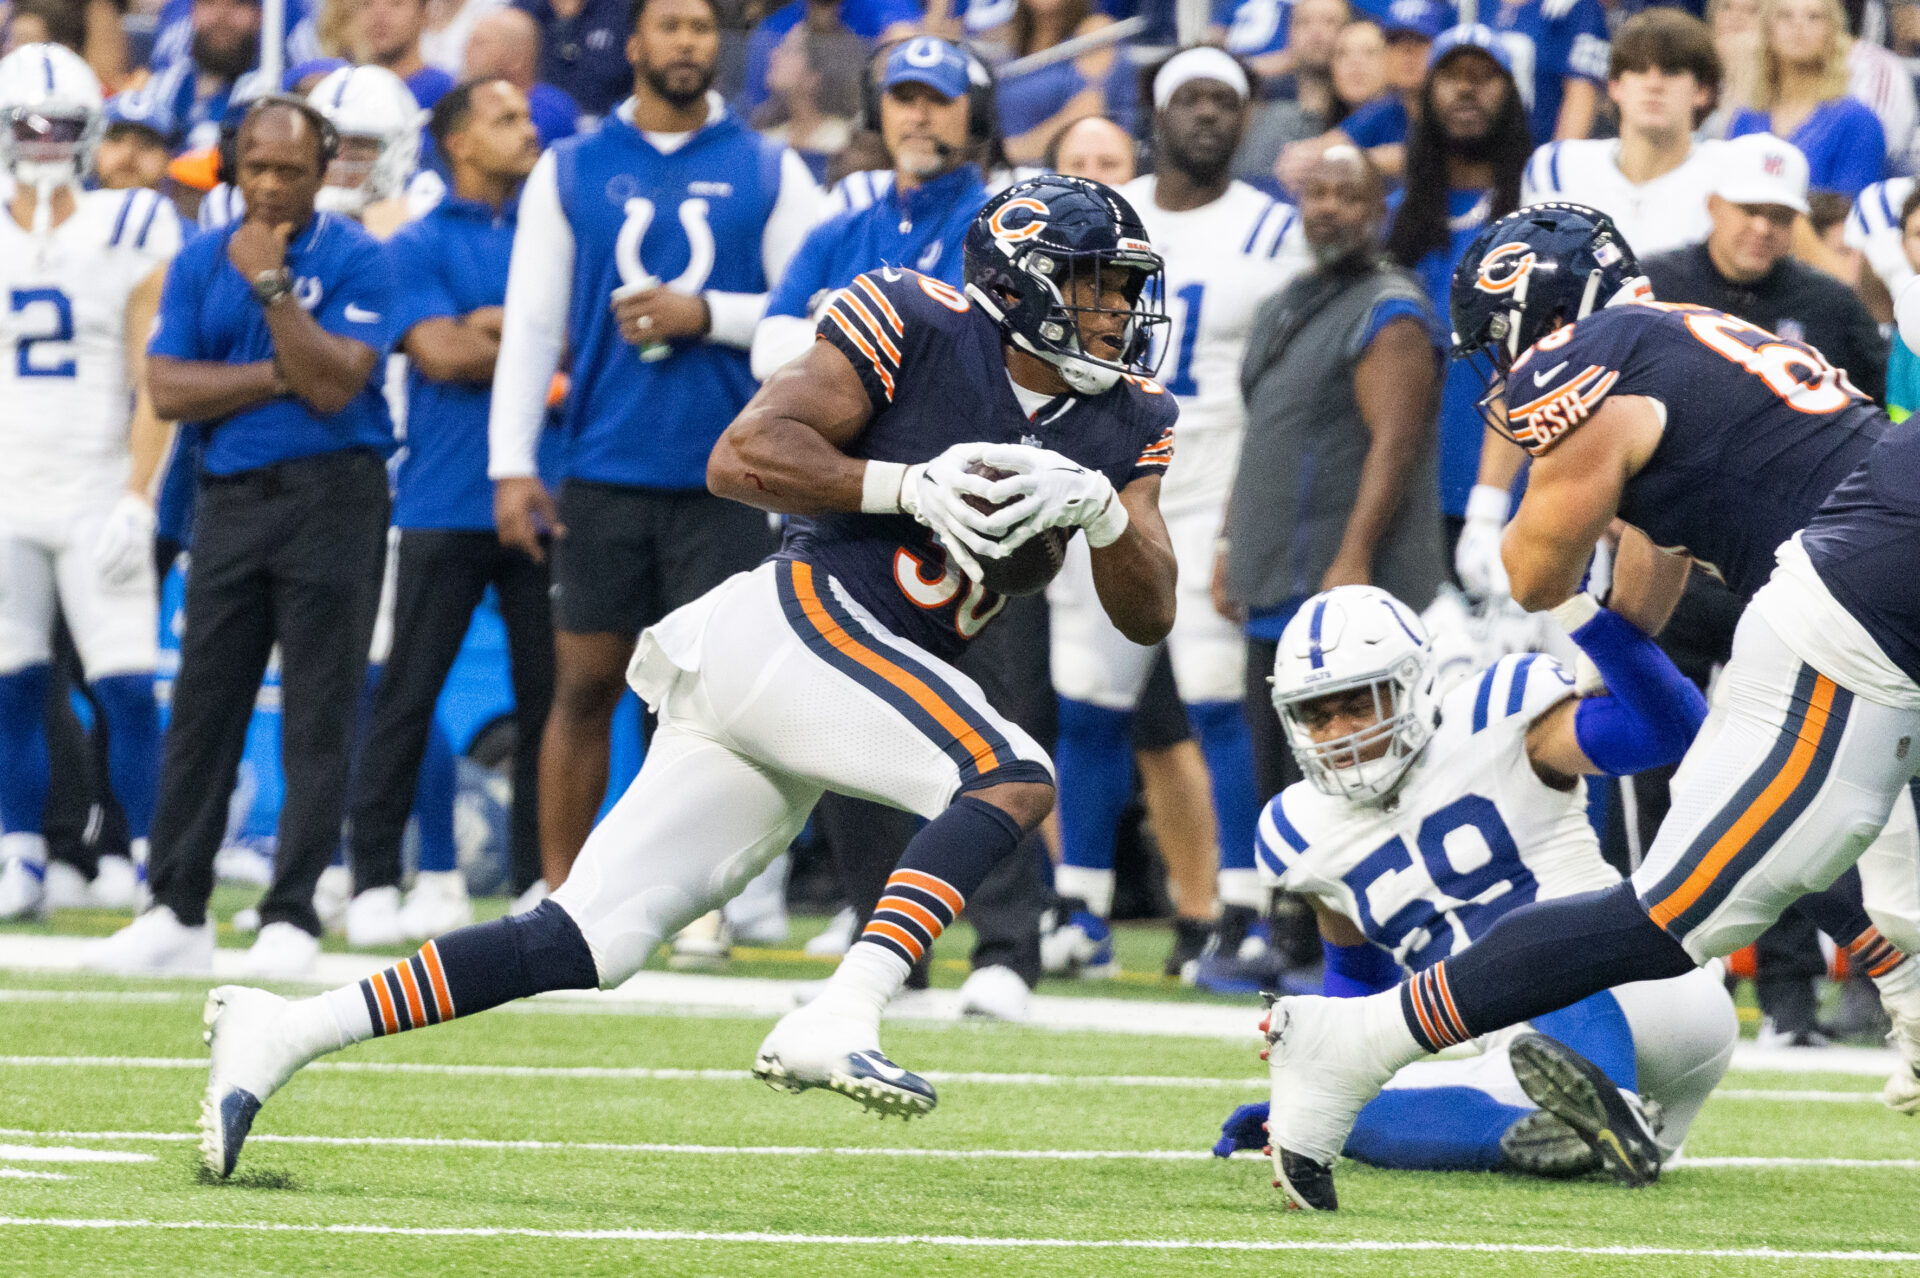 Roschon Johnson, in a dark blue jersey and helmet and white pants, runs past a Chicago teammate and a Colts defender on the ground